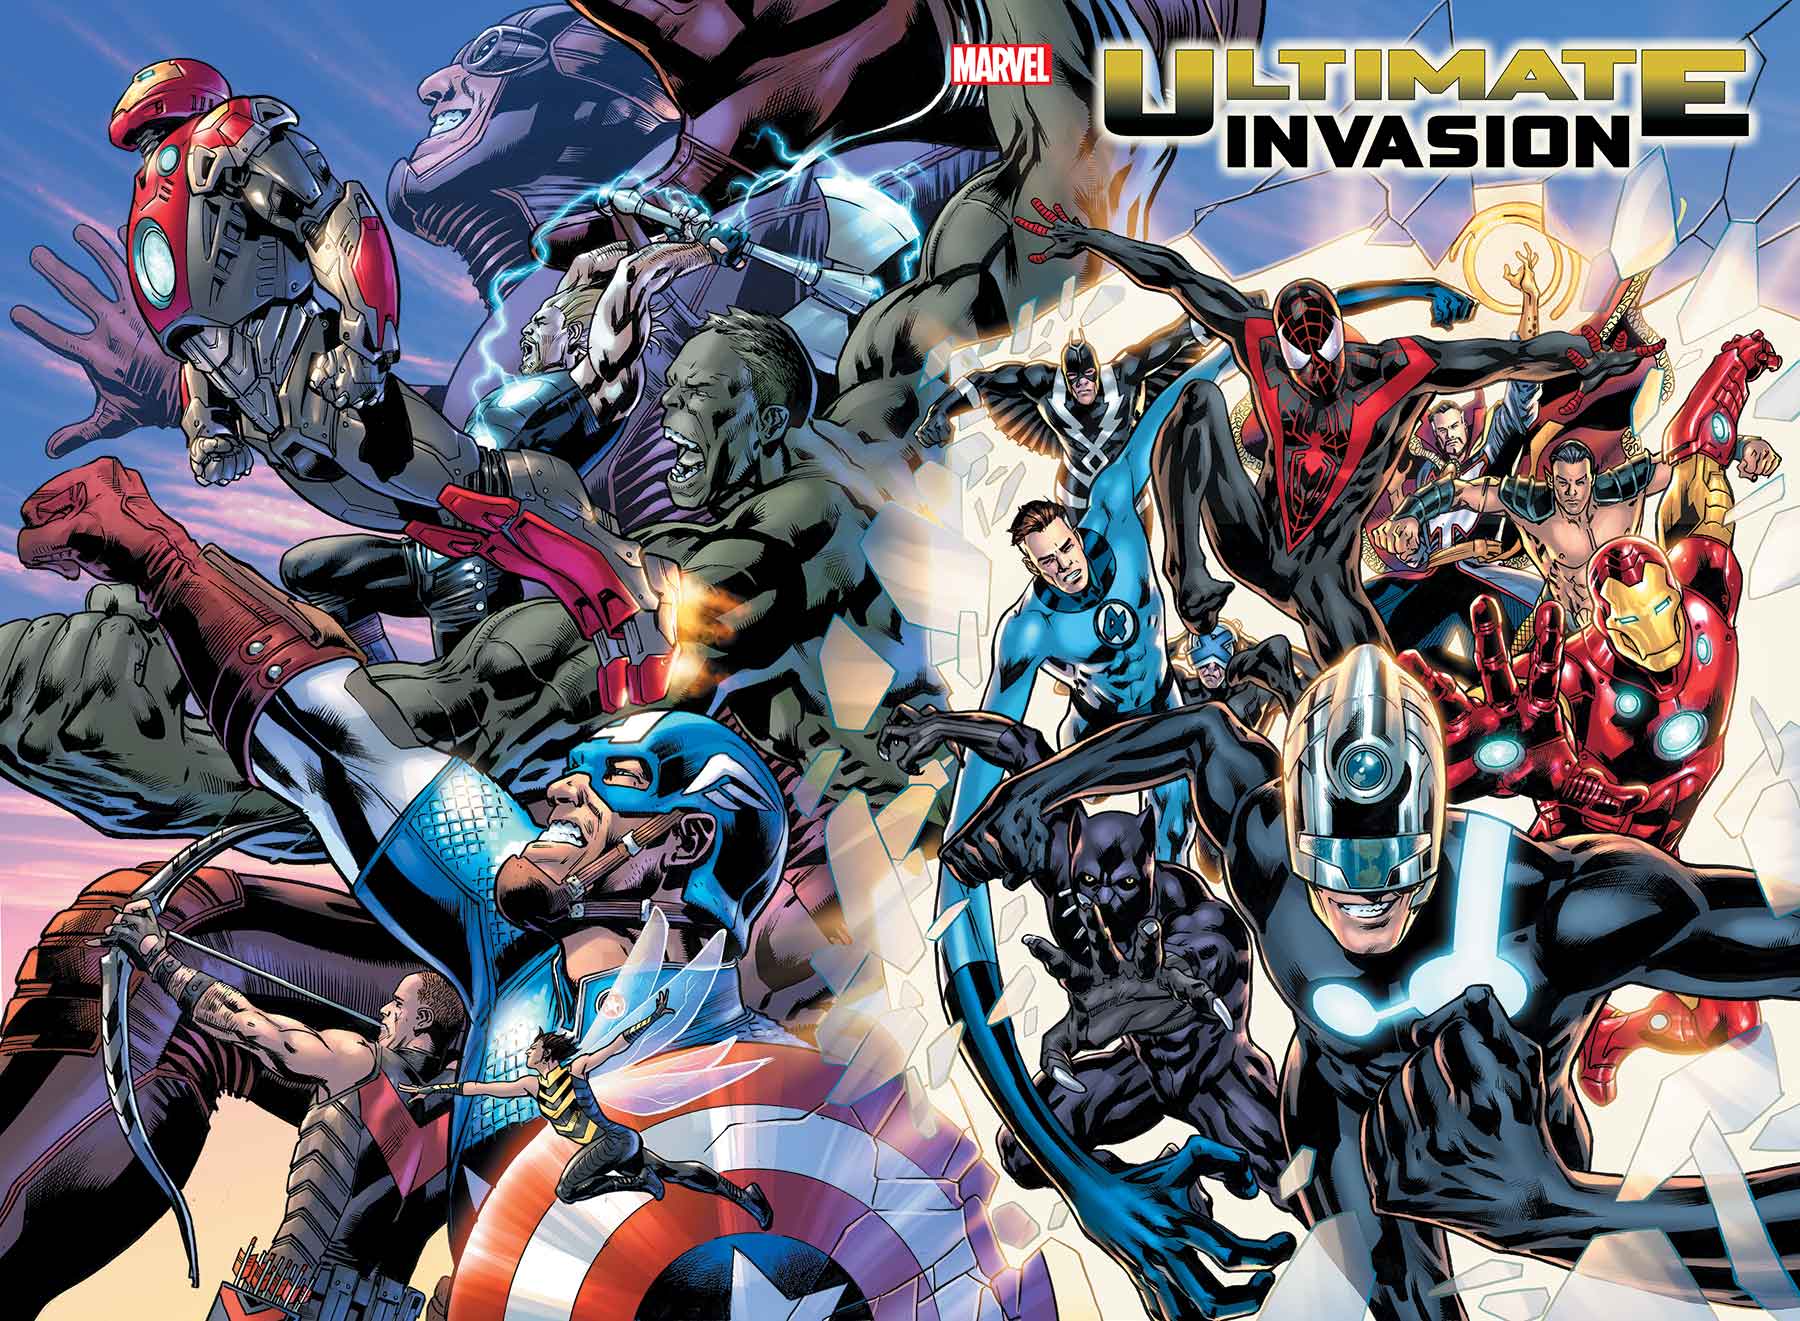 'Ultimate Invasion' #1 teaser image, interior art, and covers revealed